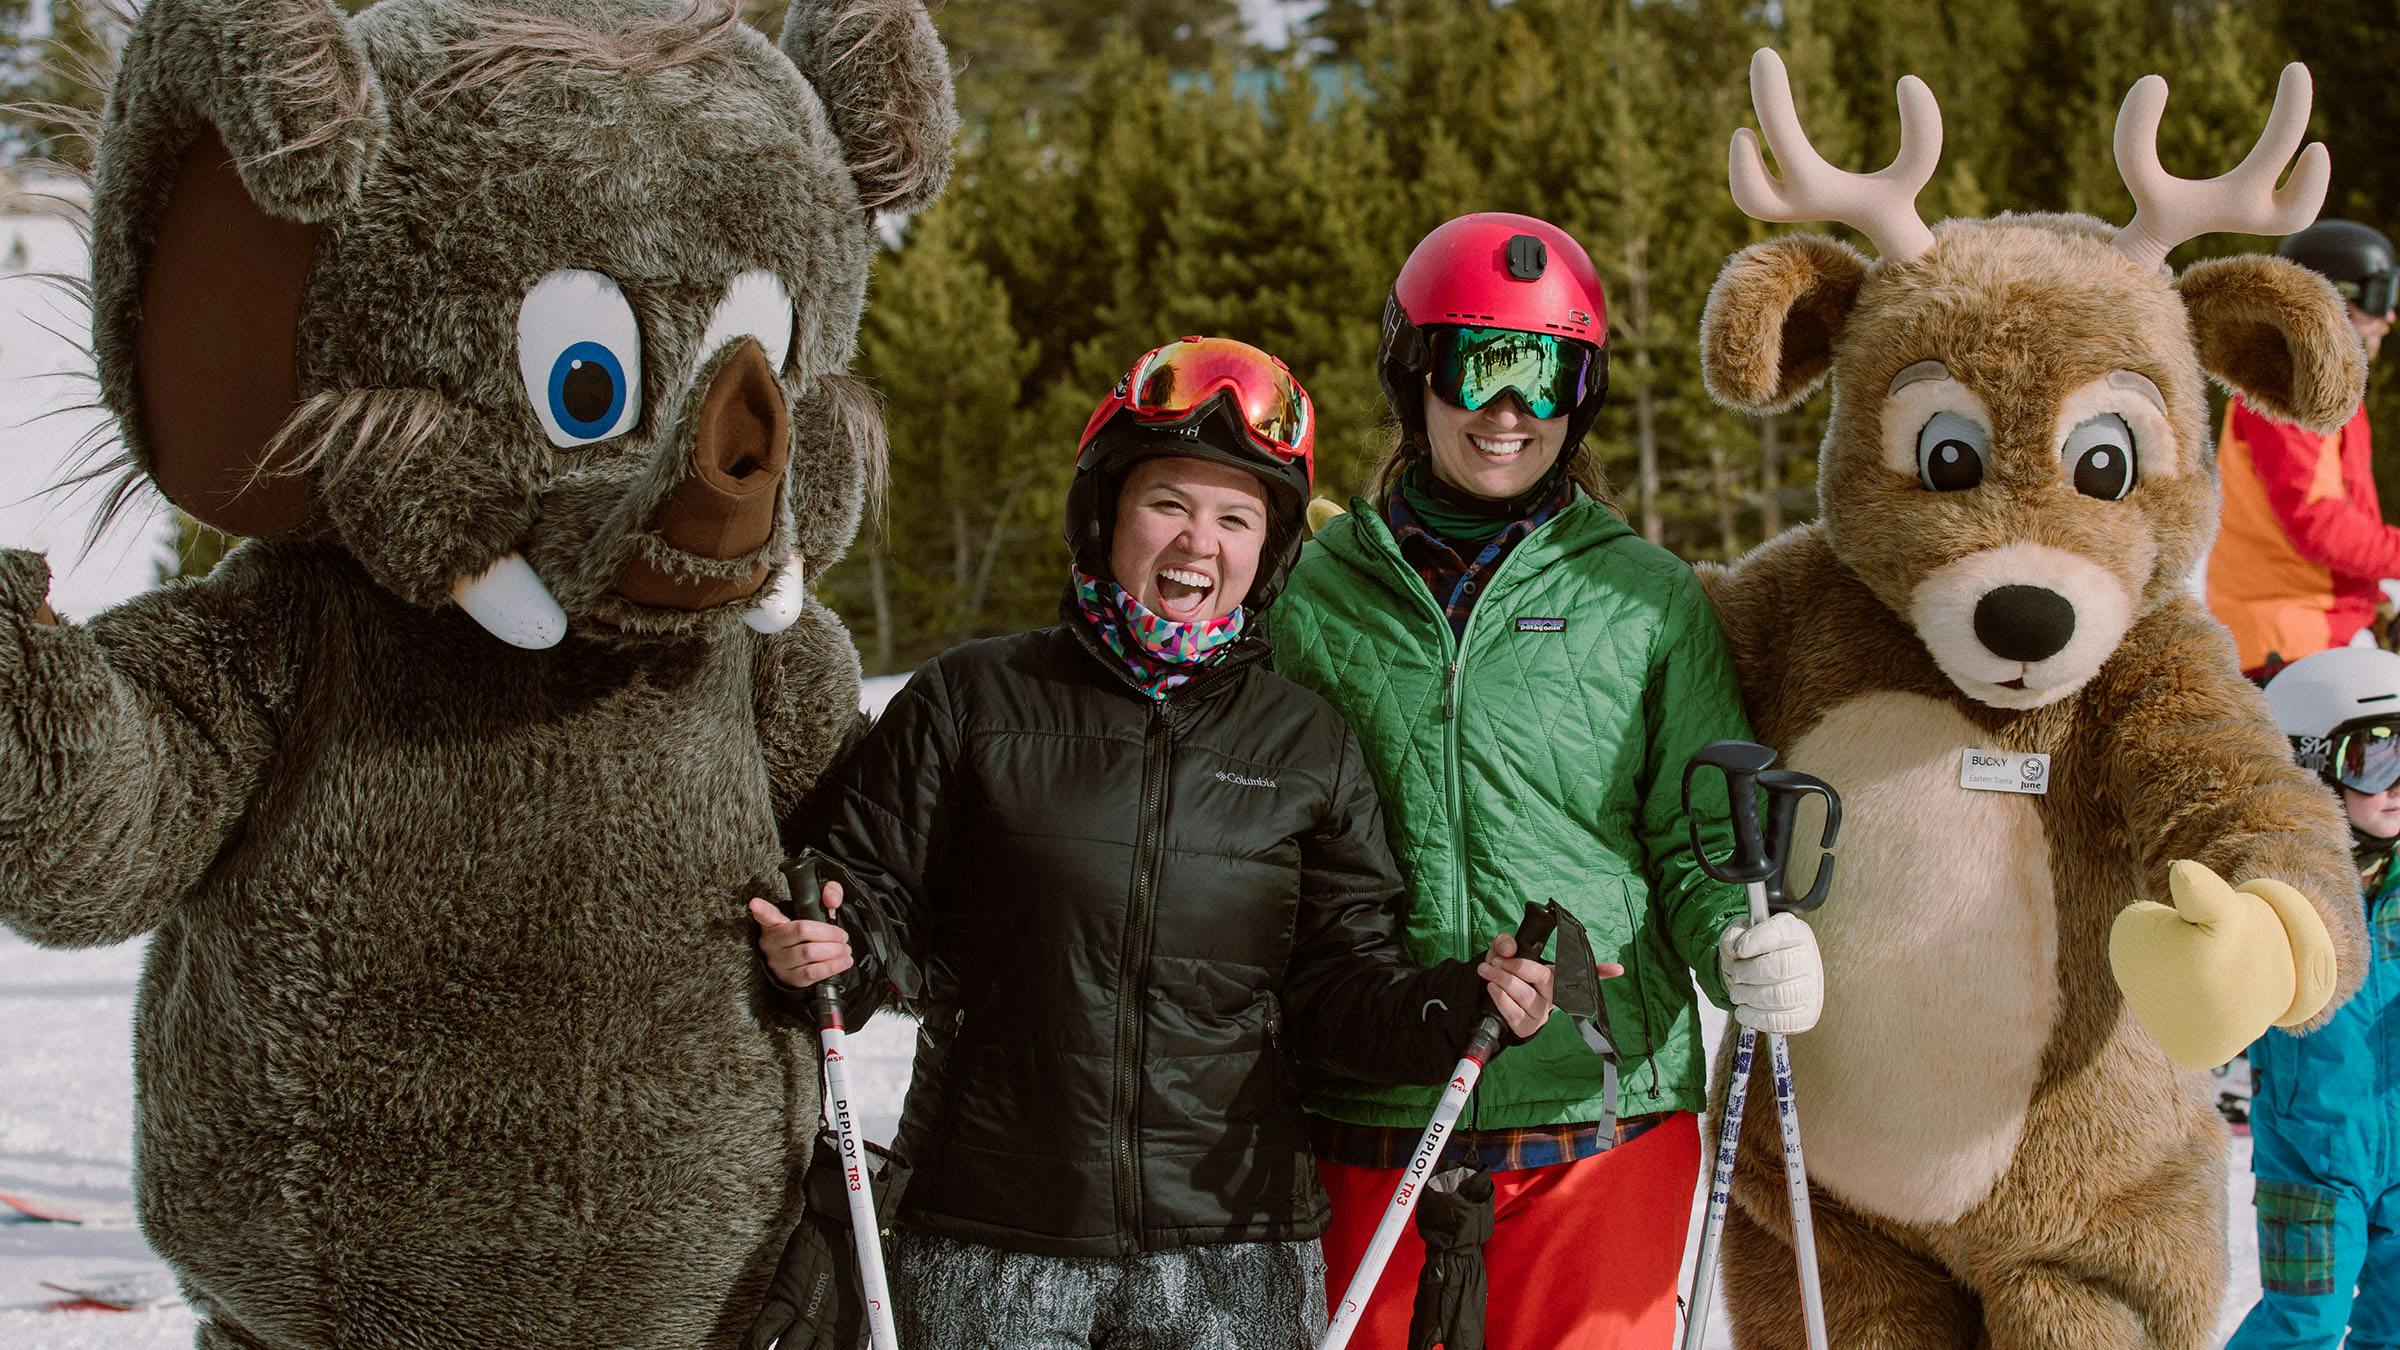 Woolly and Bucky with two skiers